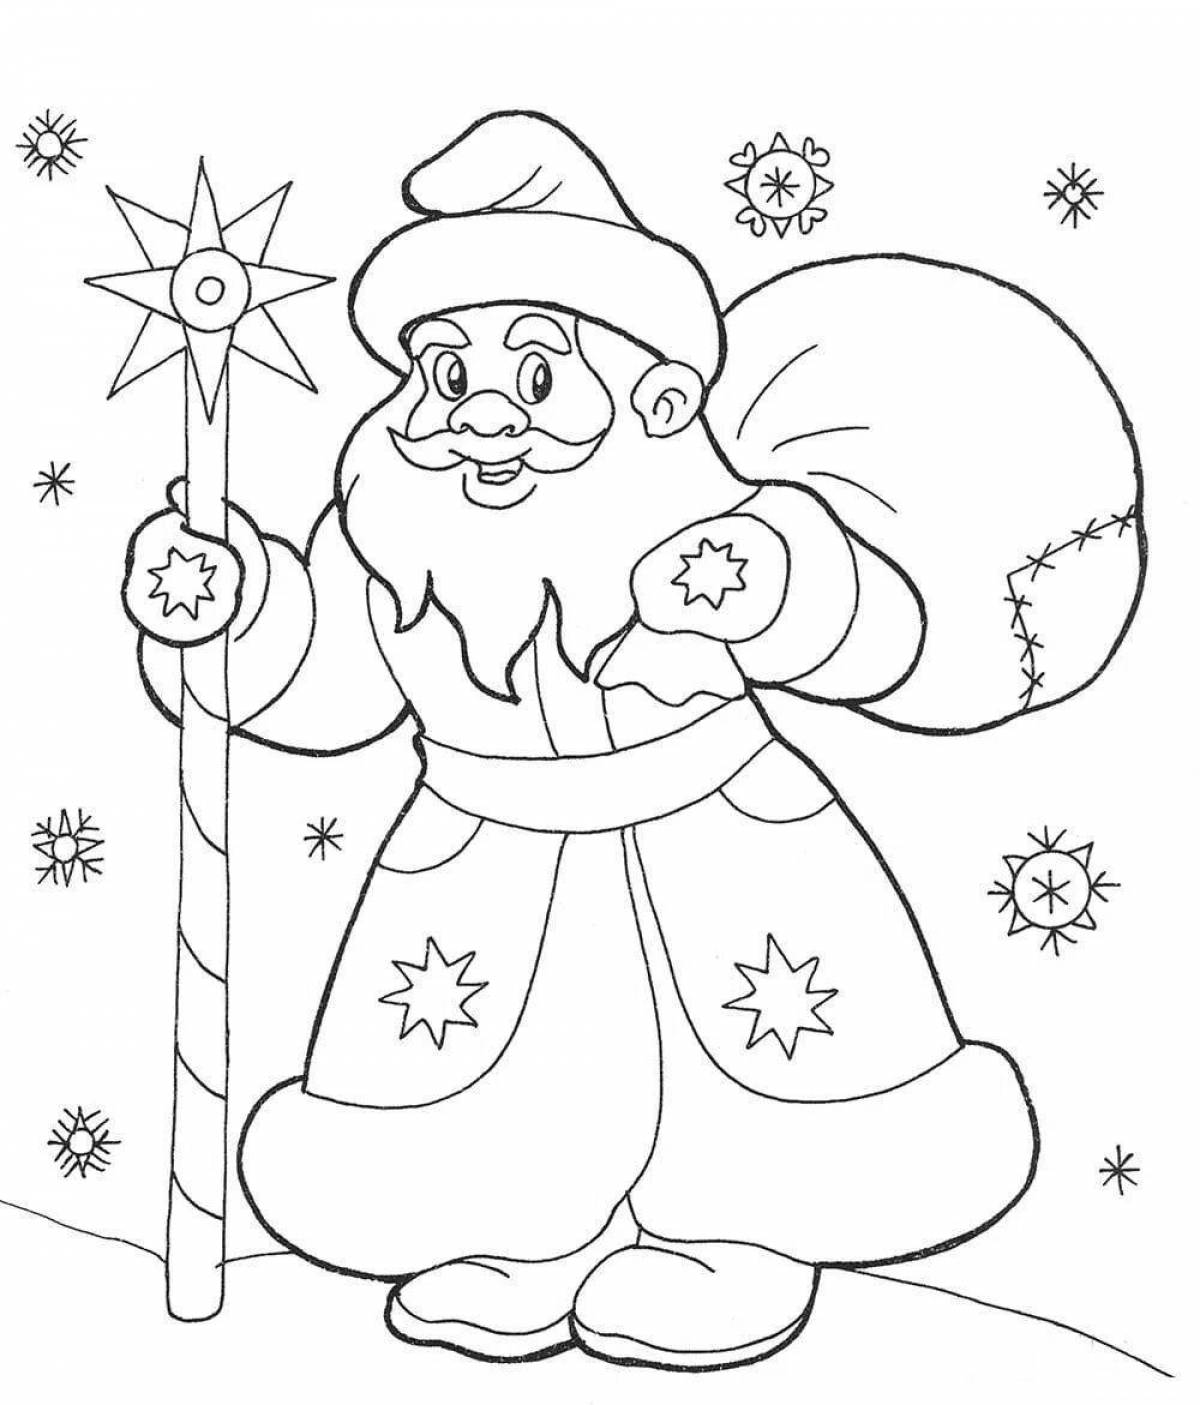 Attractive santa claus coloring book for kids